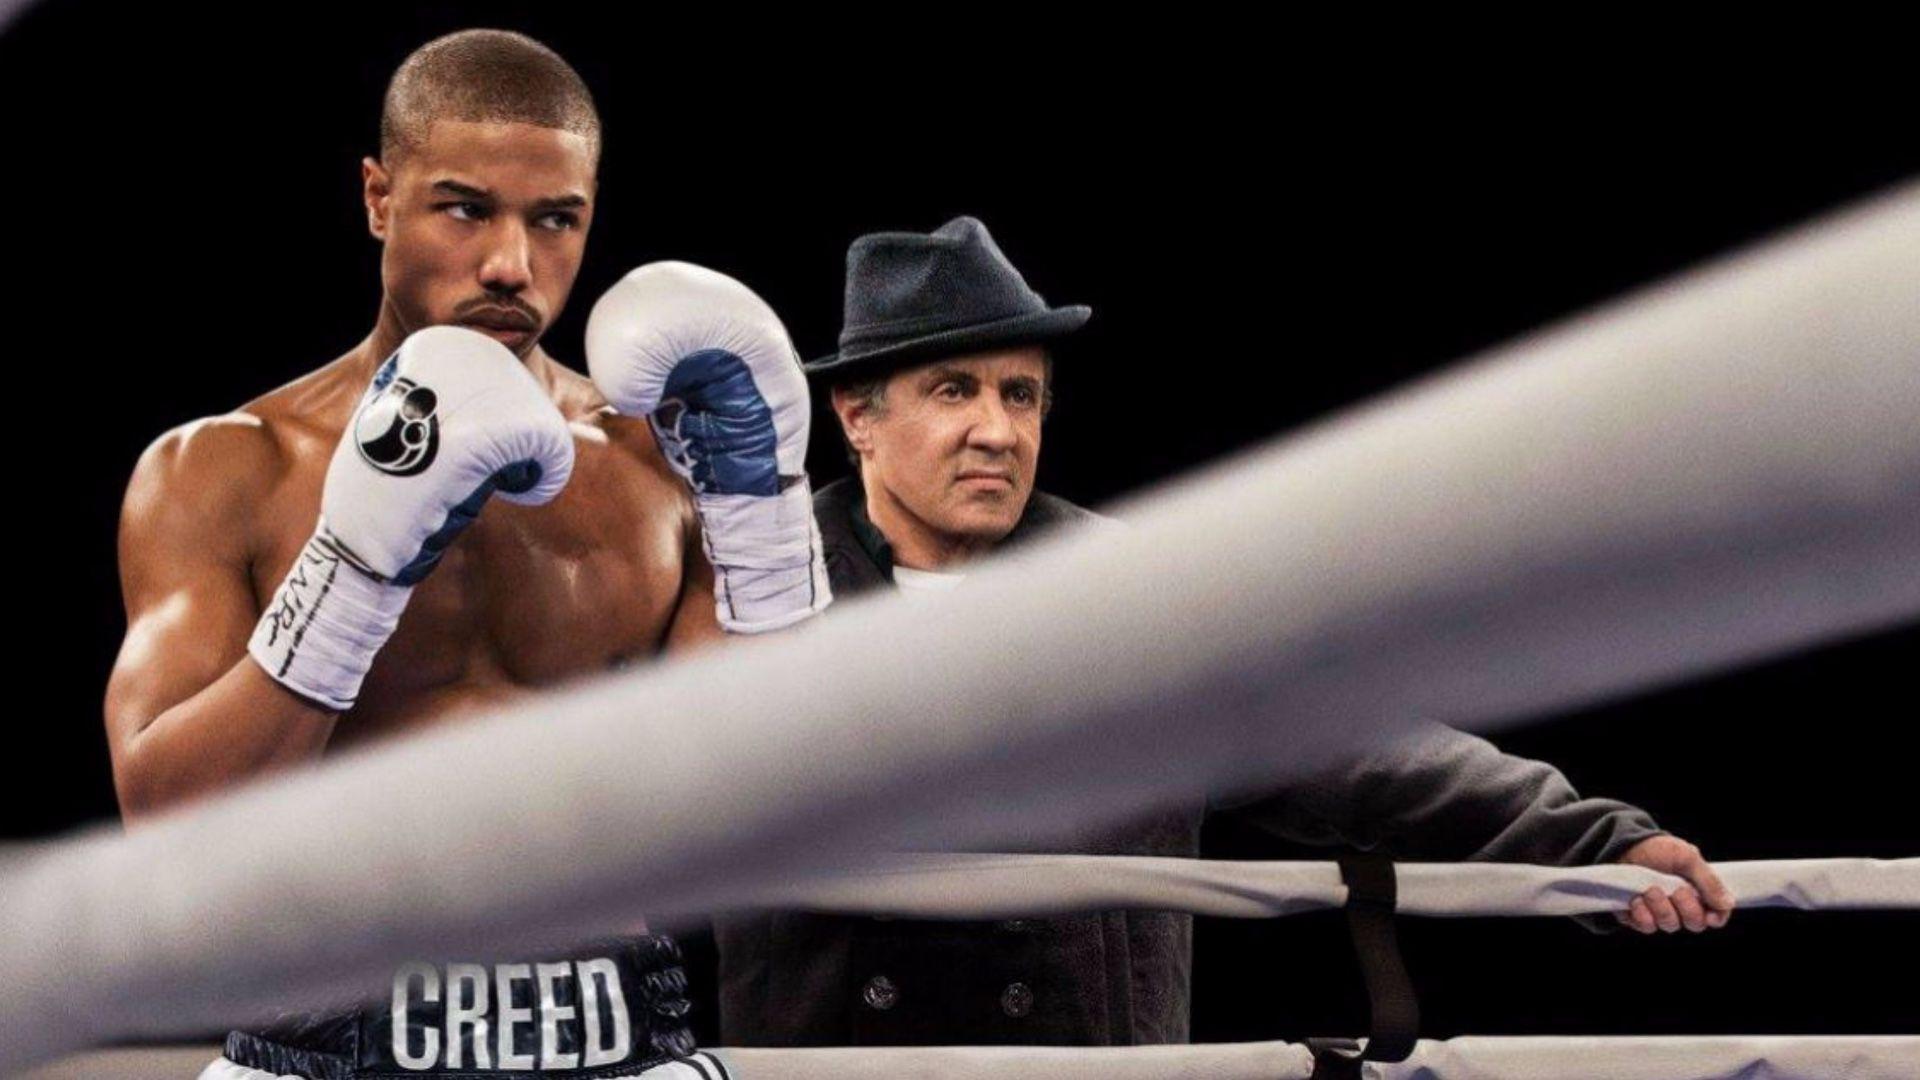 Sylvester Stallone Creed 2 Movie Poster Wallpapers